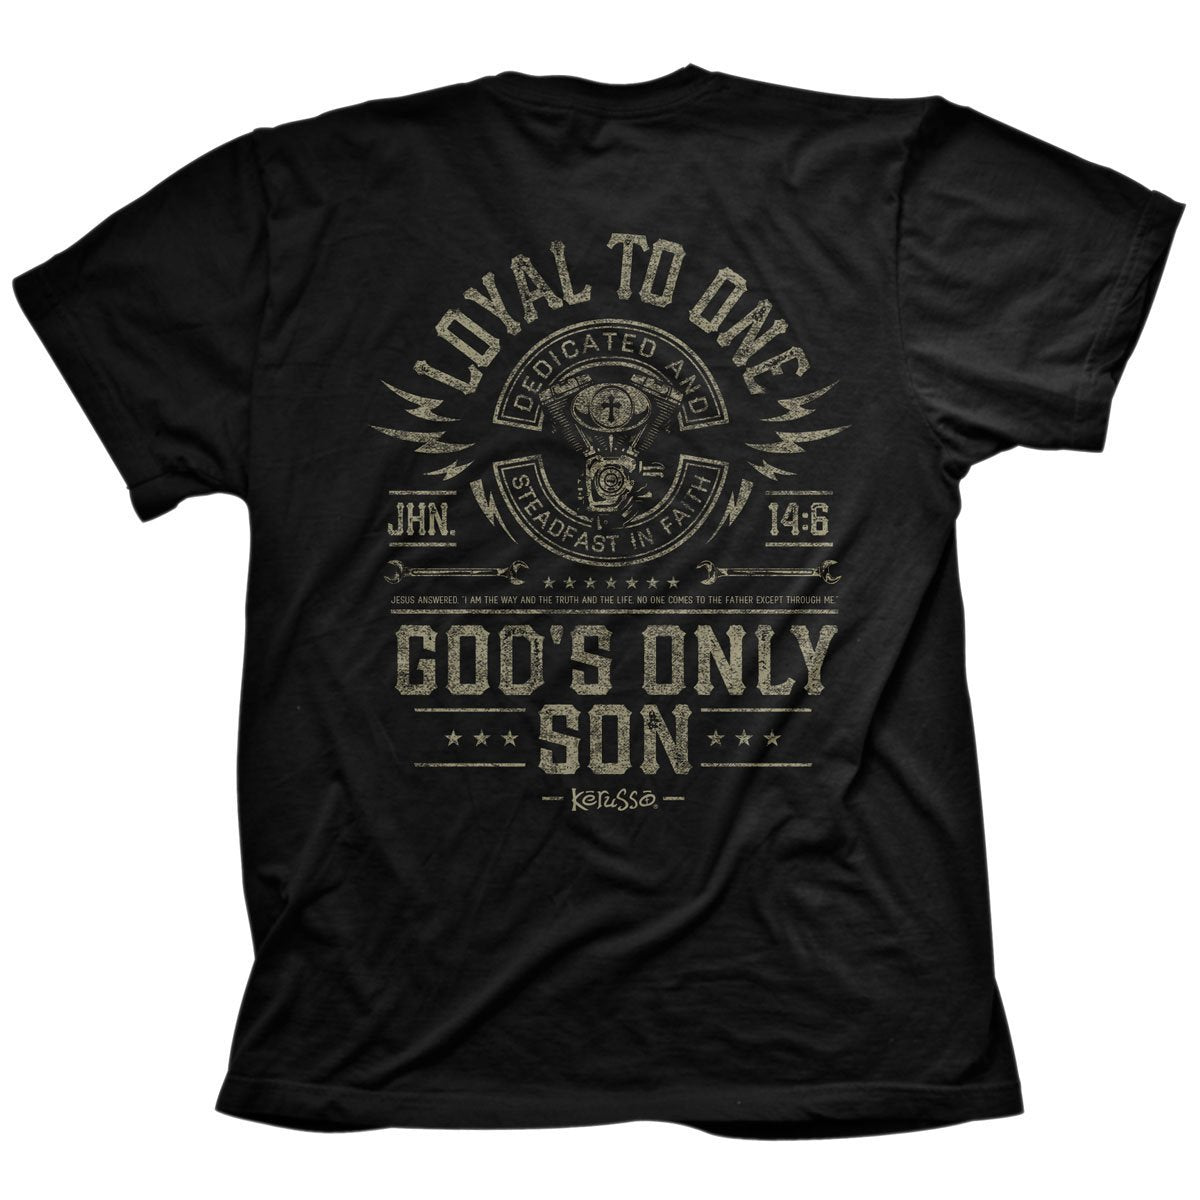 Show your dedication to Jesus in this classic “Loyal” bike themed T-Shirt in Black. When you consider who is on your team, who you really trust, and who you know you can count on when the going gets tough, the number one answer should be Jesus. He loves us so much He gave His life for us, and it is right that we should commit our lives, hearts, and loyalty to Jesus Christ as faithful Christian believers. back view. Sizes M-3X